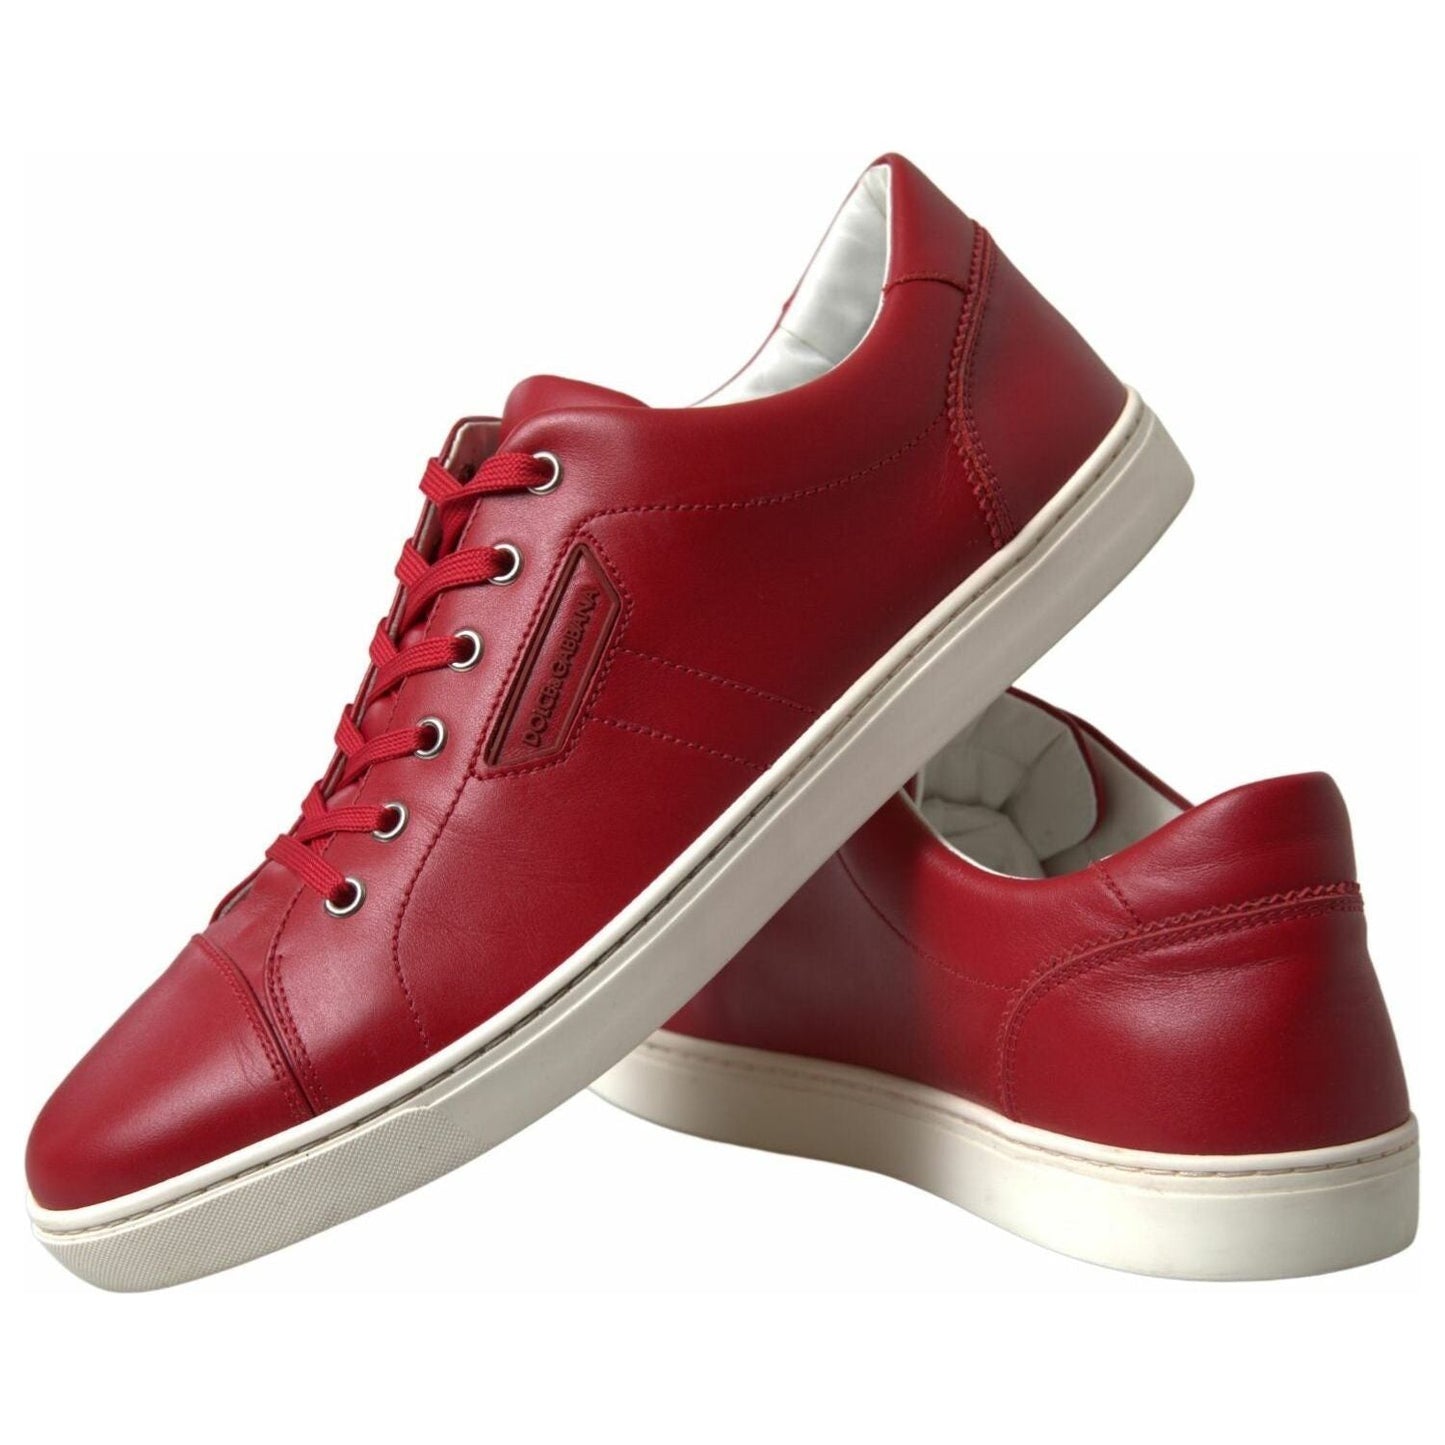 Dolce & Gabbana Elegant Red Leather Low Top Sneakers shoes-red-portofino-leather-low-top-mens-sneakers 7-scaled-8195c07b-1bb.jpg